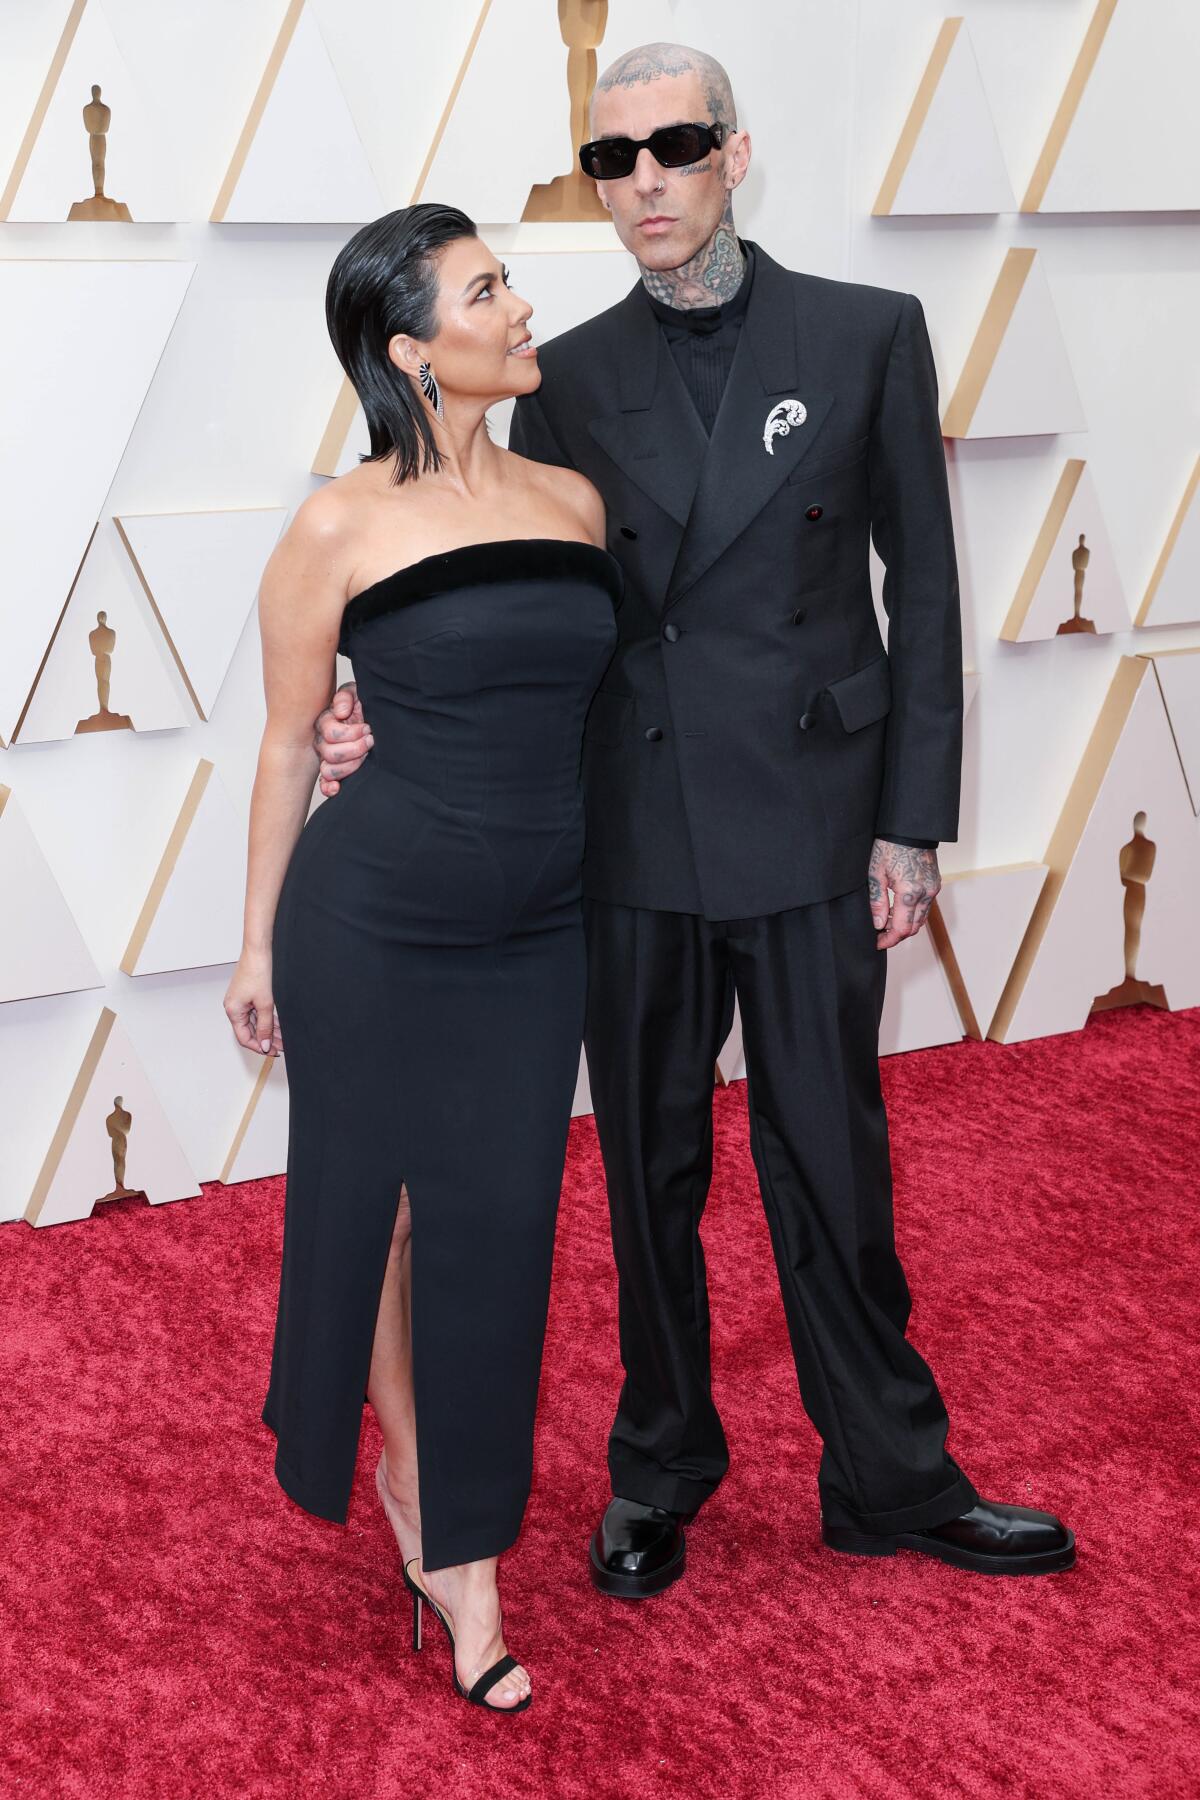 A woman with dark hair looks up at a man wearing sunglasses and a dark suit on a red carpet.